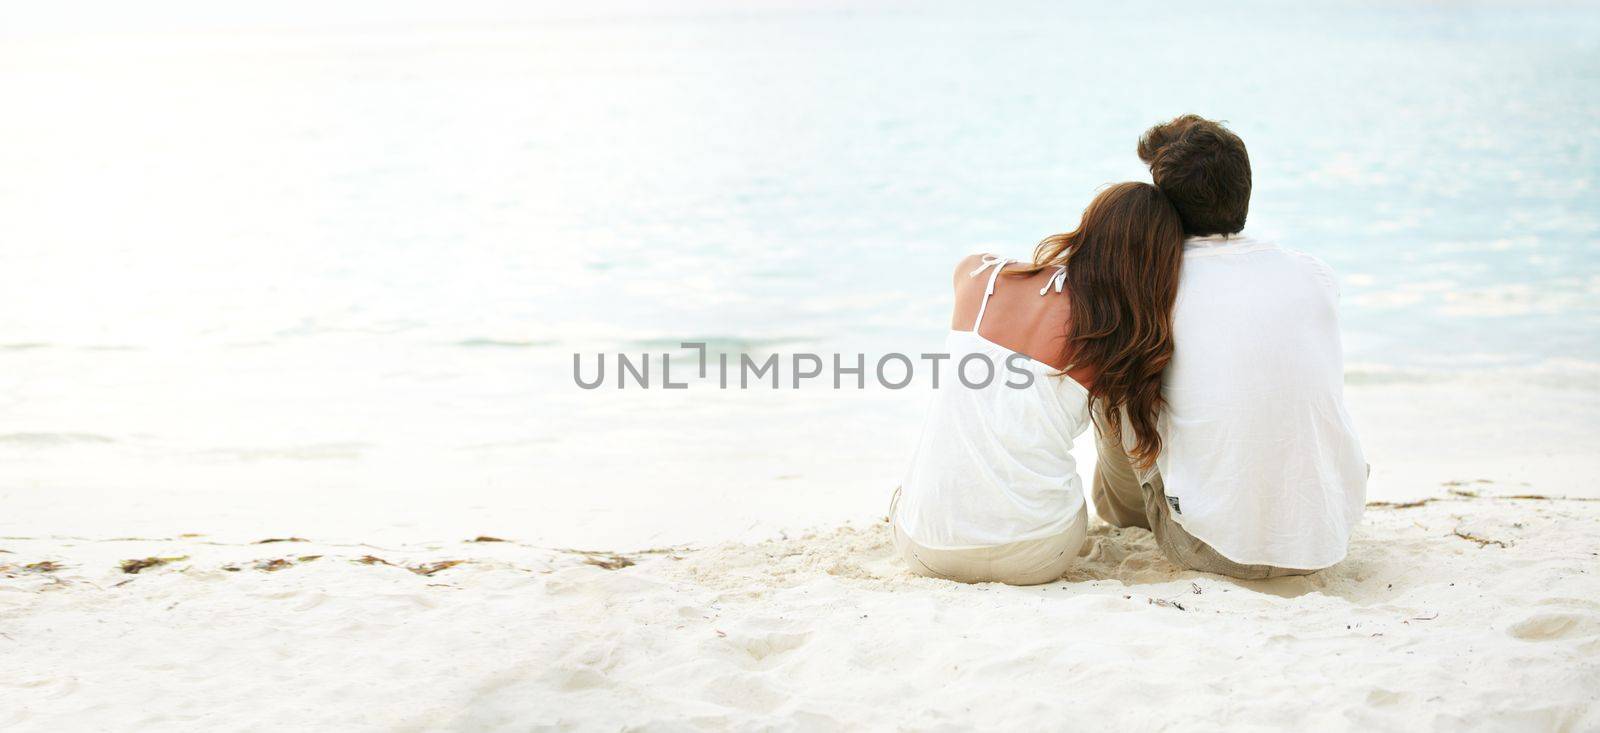 Bonding intimately upon the beach - Love Romance. Two young lovers looking over a calm ocean towards a beautiful sunset - Copyspace. by YuriArcurs